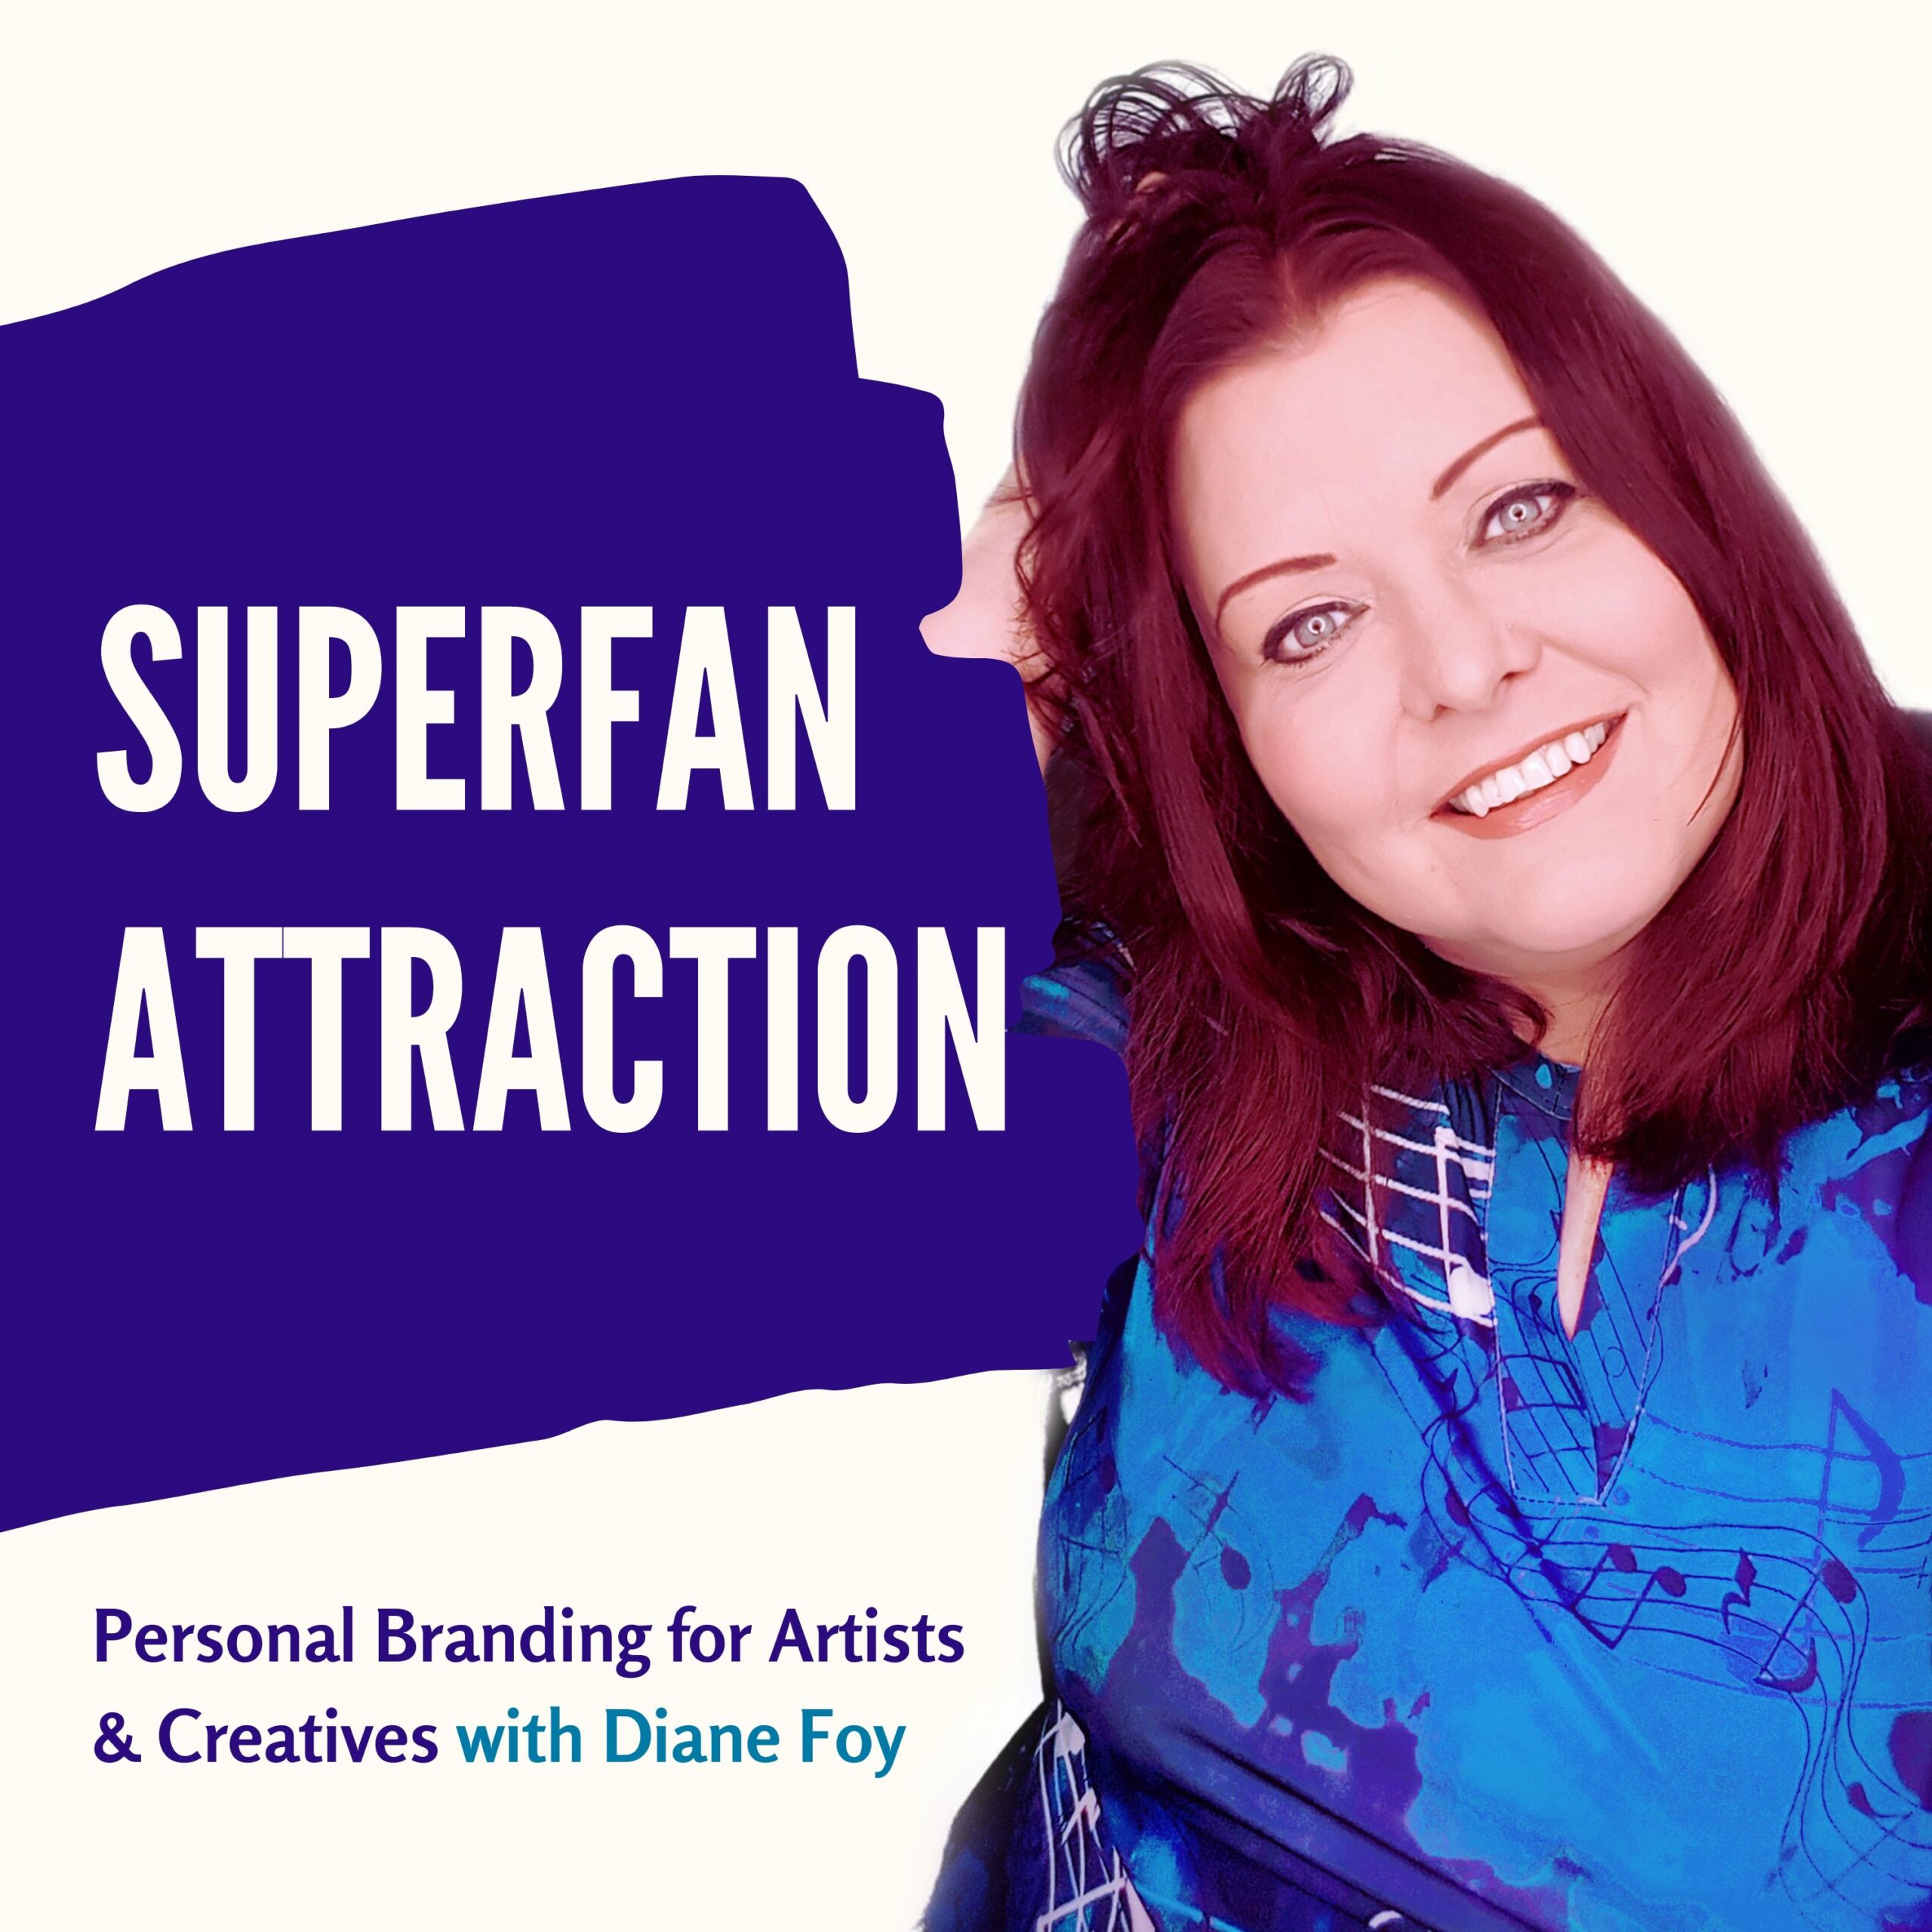 Superfan Attraction: Personal Branding for Artists & Creatives with Diane Foy